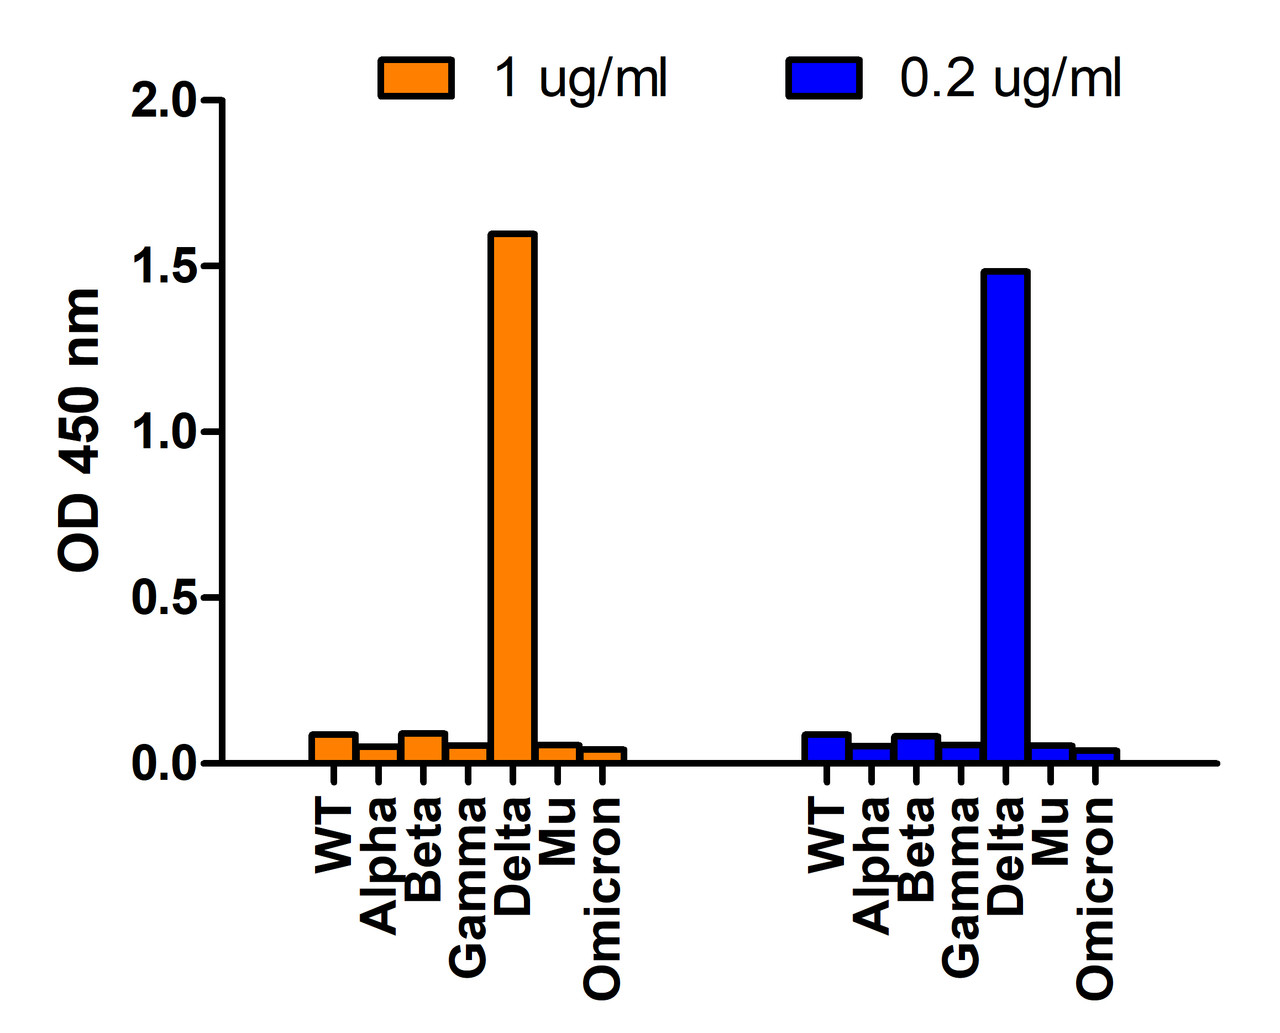 Figure 1 SARS-Cov-2 Spike L452R (Delta Variant) Antibodies Specifically Detect Delta Variant Spike S1 Protein in an ELISA 
Coating Antigen: SARS-CoV-2 spike S1 proteins WT, alpha variant (B.1.1.7) , beta variant (B.1.351) , gamma variant (P.1) , delta variant (B.1.617.2) , mu variant (B.1.621) , and omicron variant (B.1.1.529) , 1 &#956;g/mL, incubated at 4 &#730;C overnight.
Detection Antibodies: SARS-CoV-2 Delta Variant Spike antibody, 9463, dilution: 200 and 1000 ng/mL, incubated at RT for 1 hr.
Secondary Antibodies: Goat anti-rabbit HRP at 1:20, 000, incubated at RT for 1 hr.